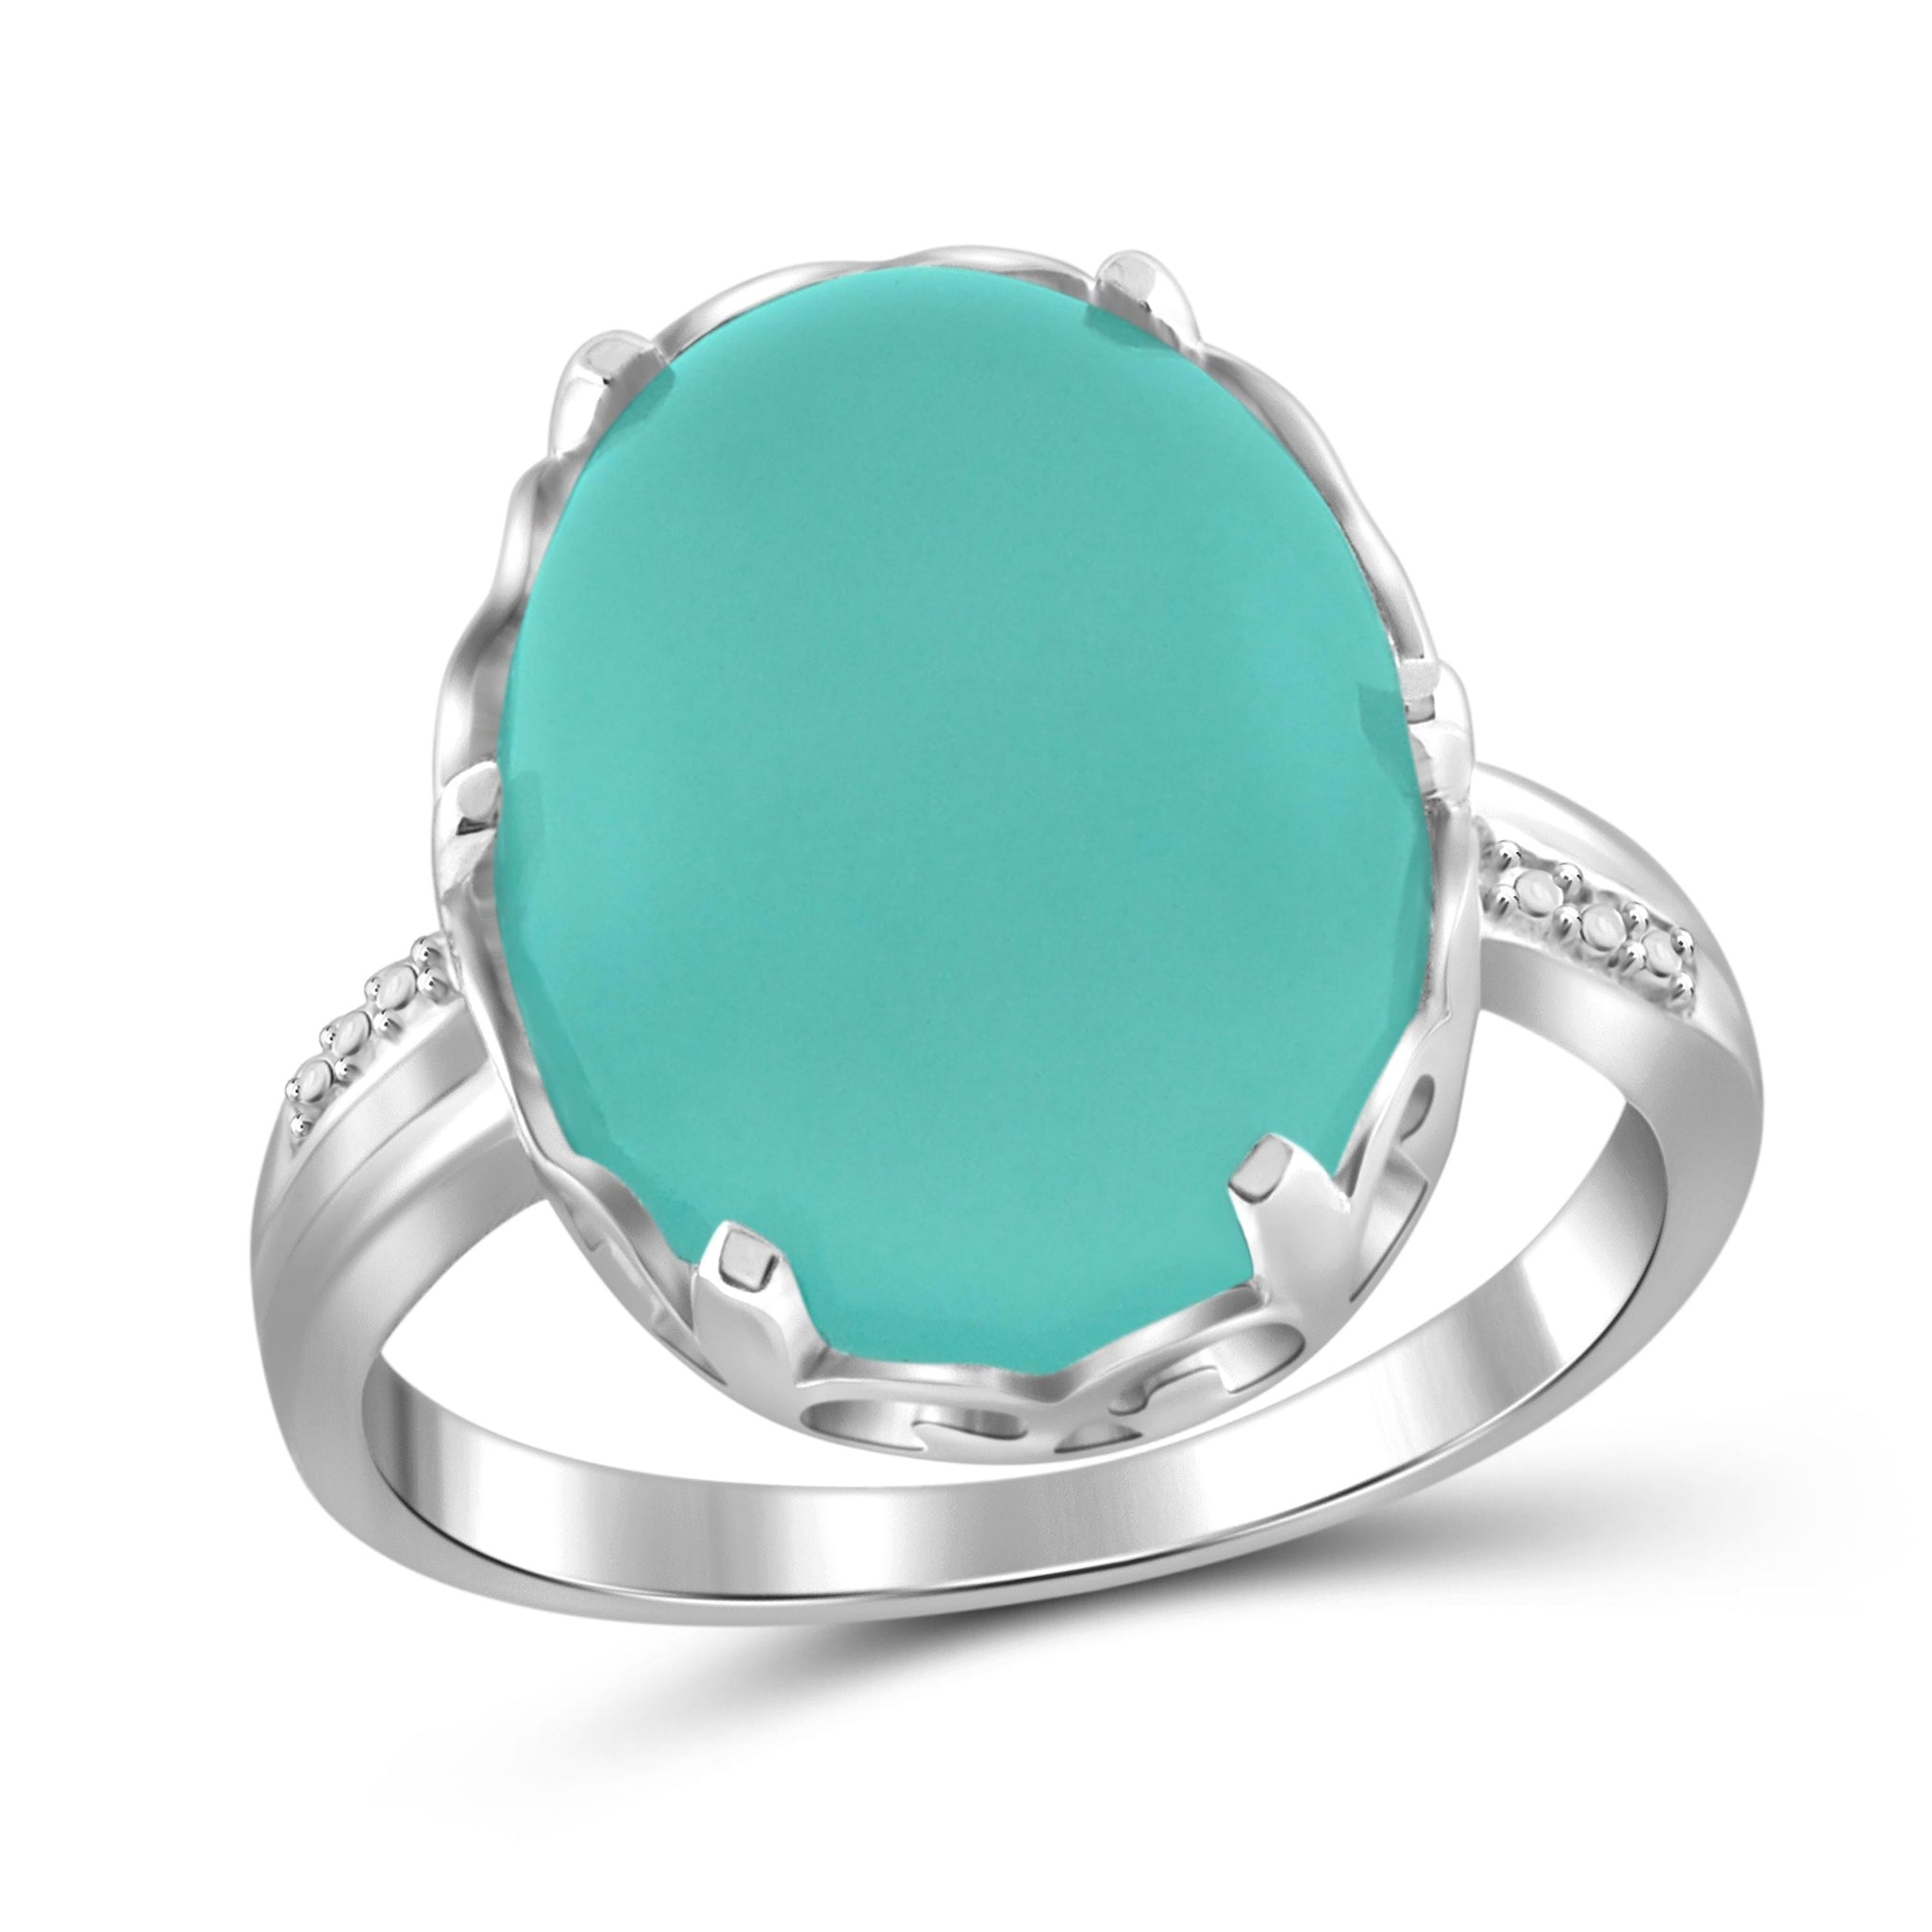 JewelonFire 9 3/4 Carat T.G.W. Chalcedony Sterling Silver Fashion Ring